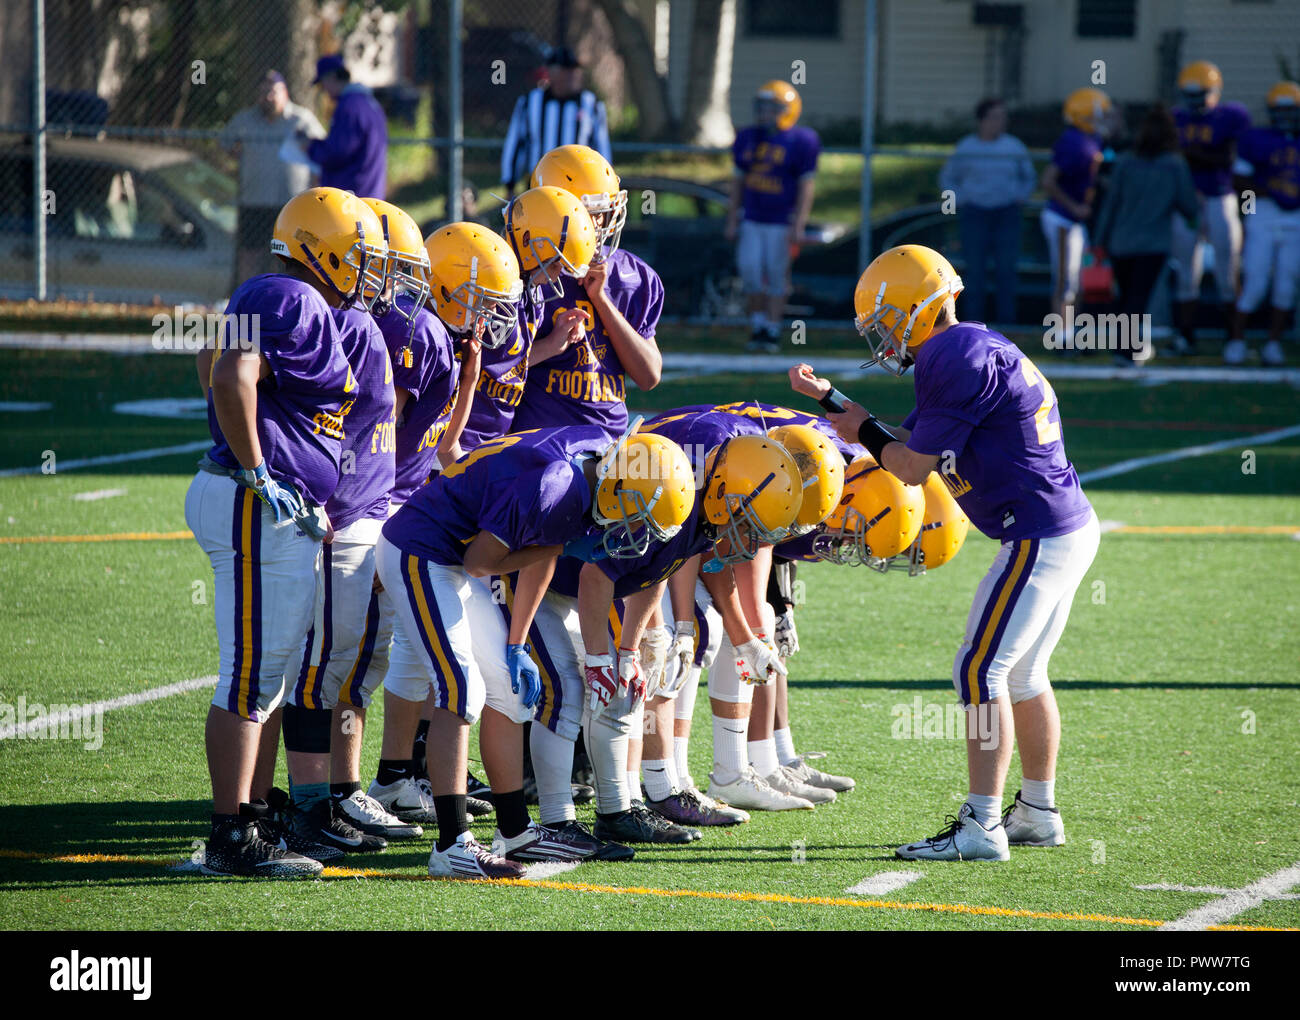 Quarterback reads the game play from wrist for Cretin-Durham Hall High School football team in the huddle on the field. St Paul Minnesota MN USA Stock Photo